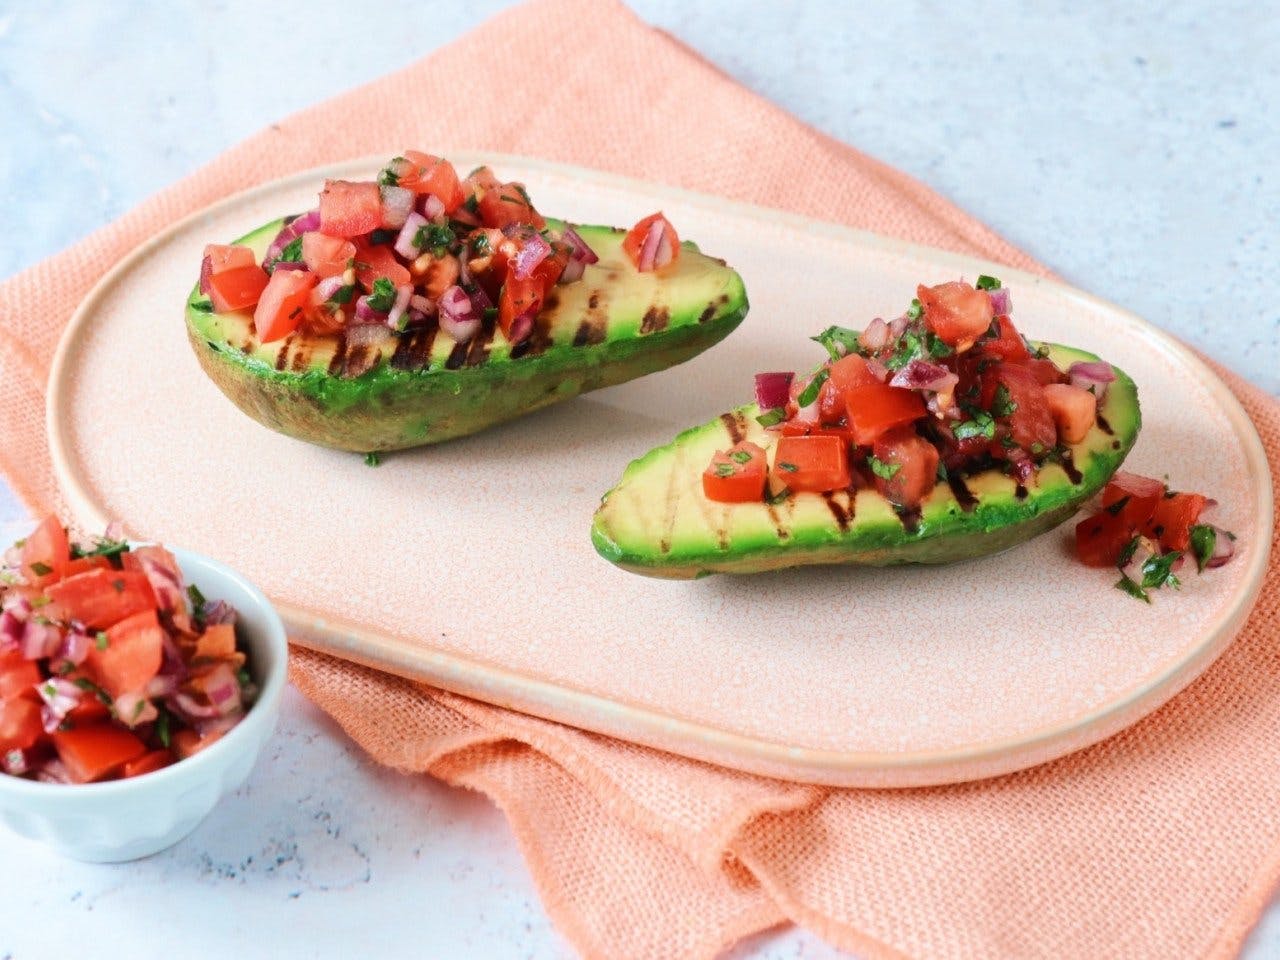 Grilled avocado with tomato salsa